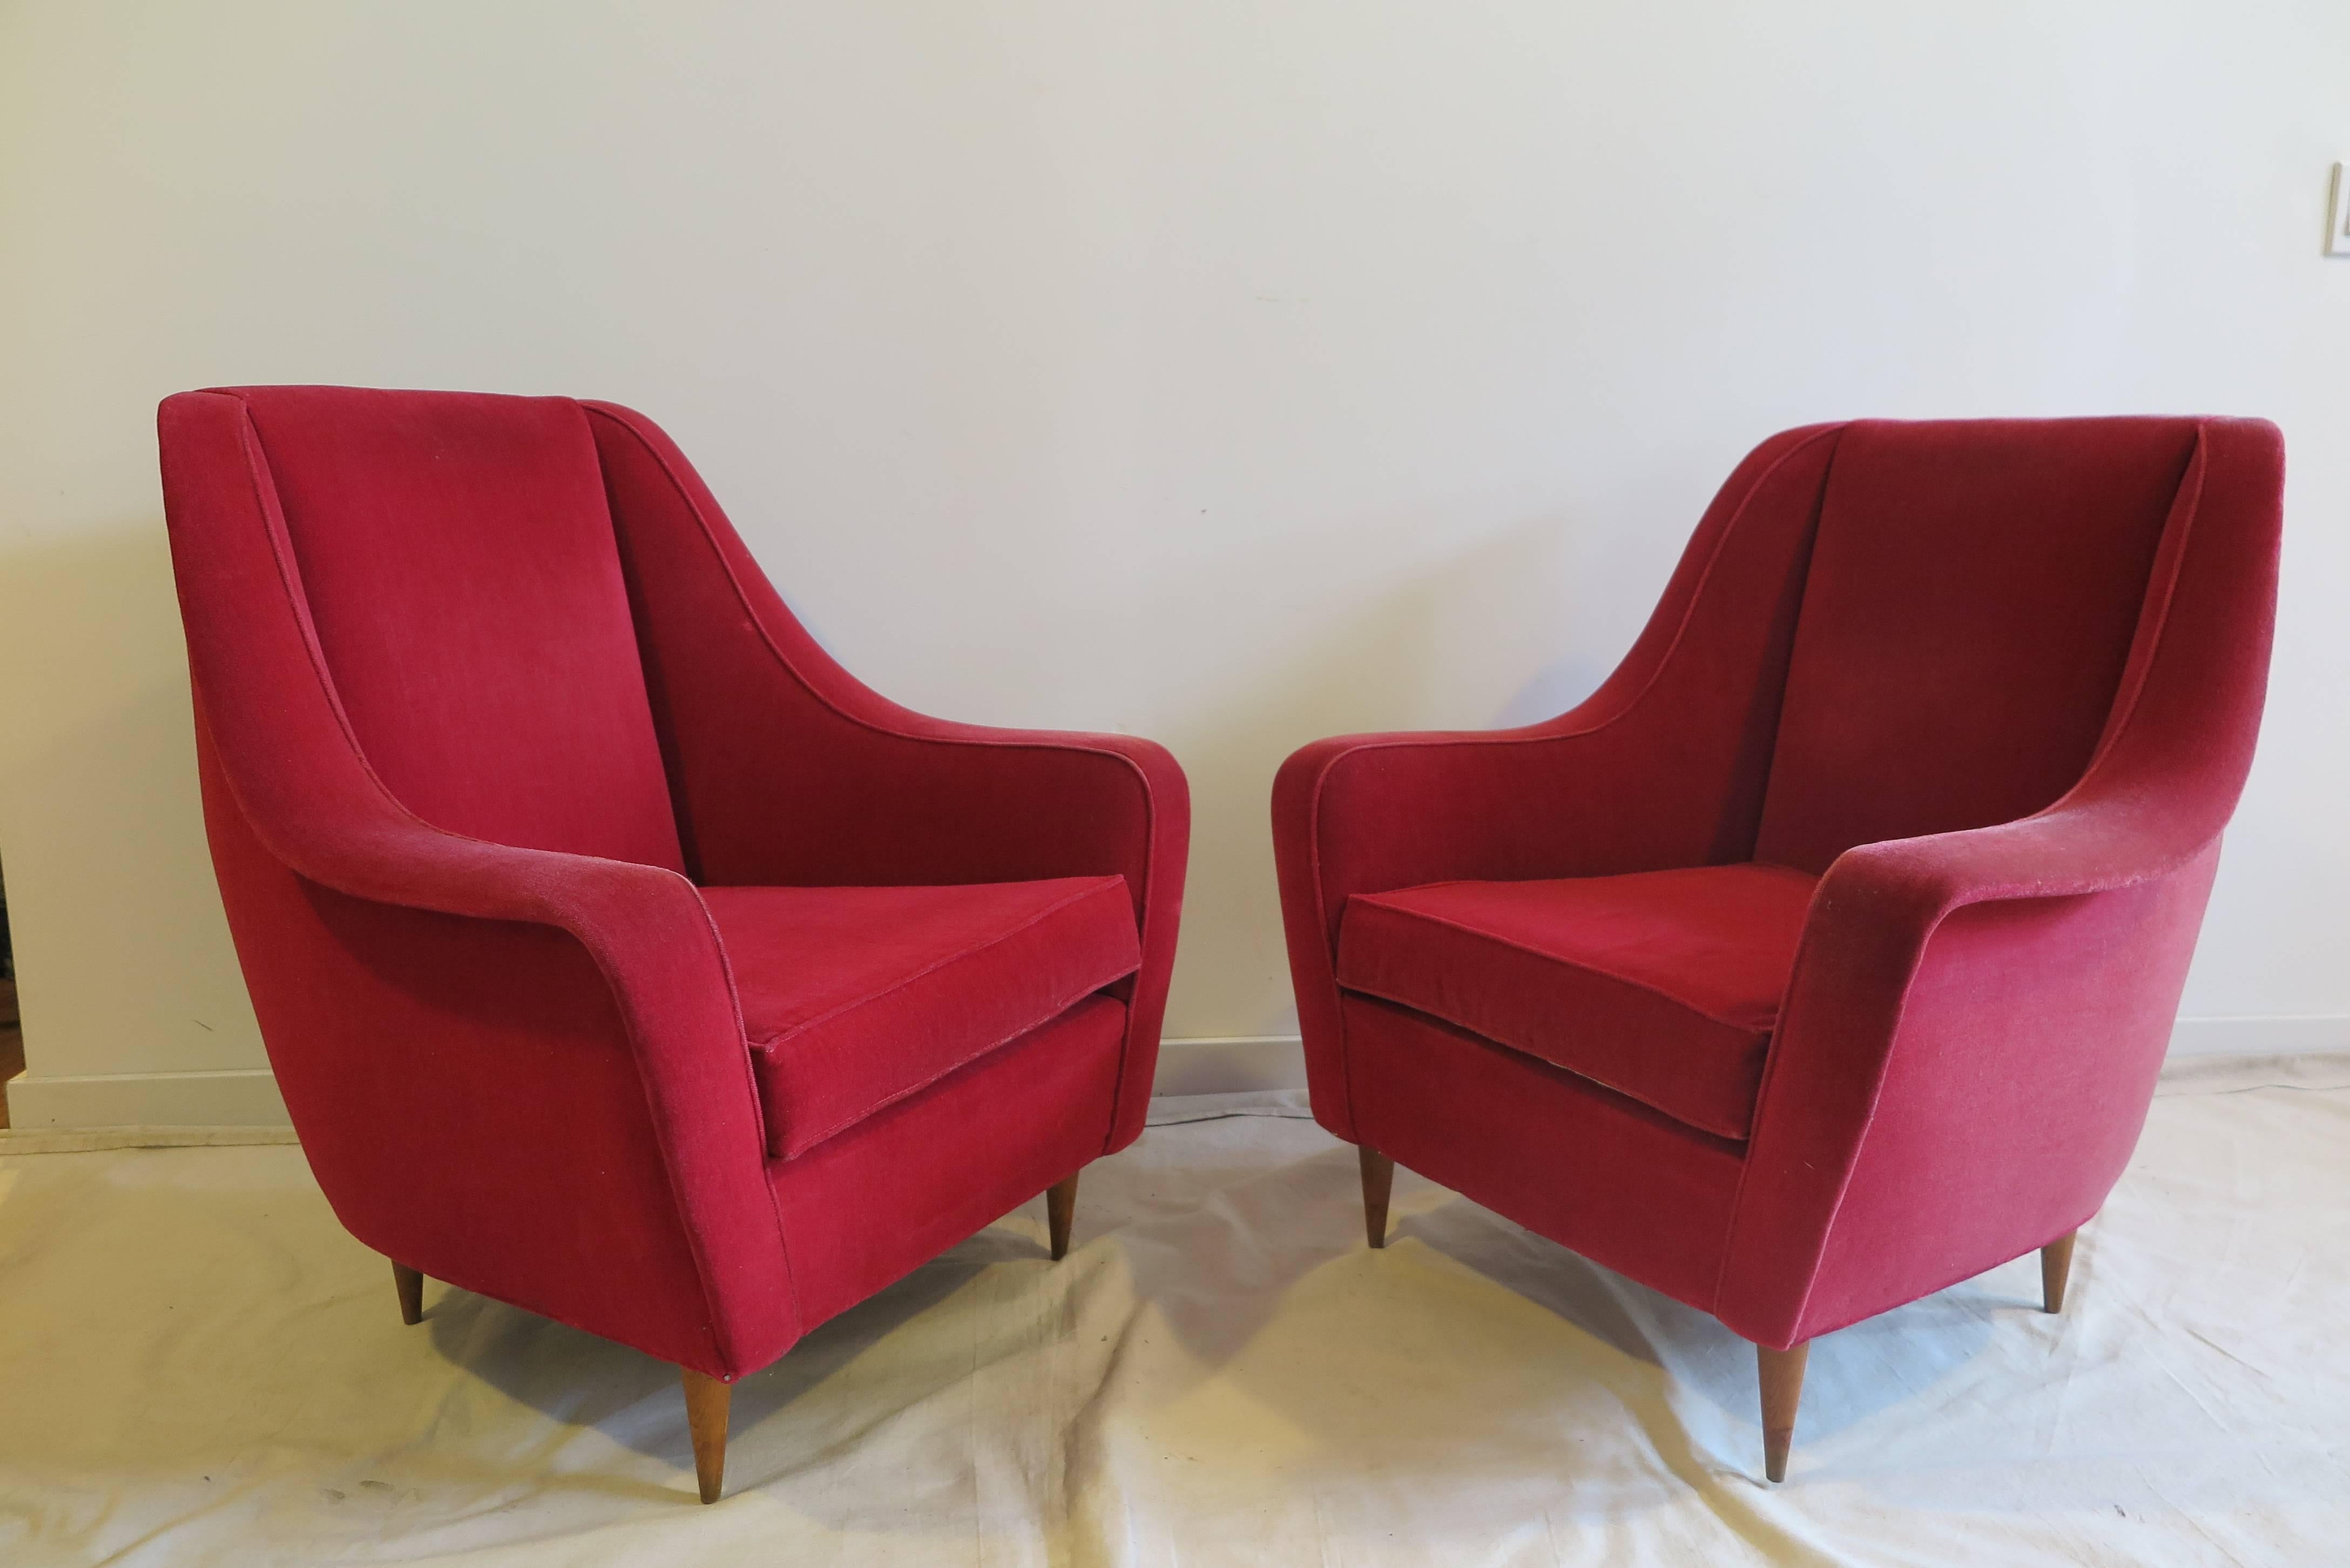 Mid-20th Century Italian Chairs in the Style of Ico Parisi